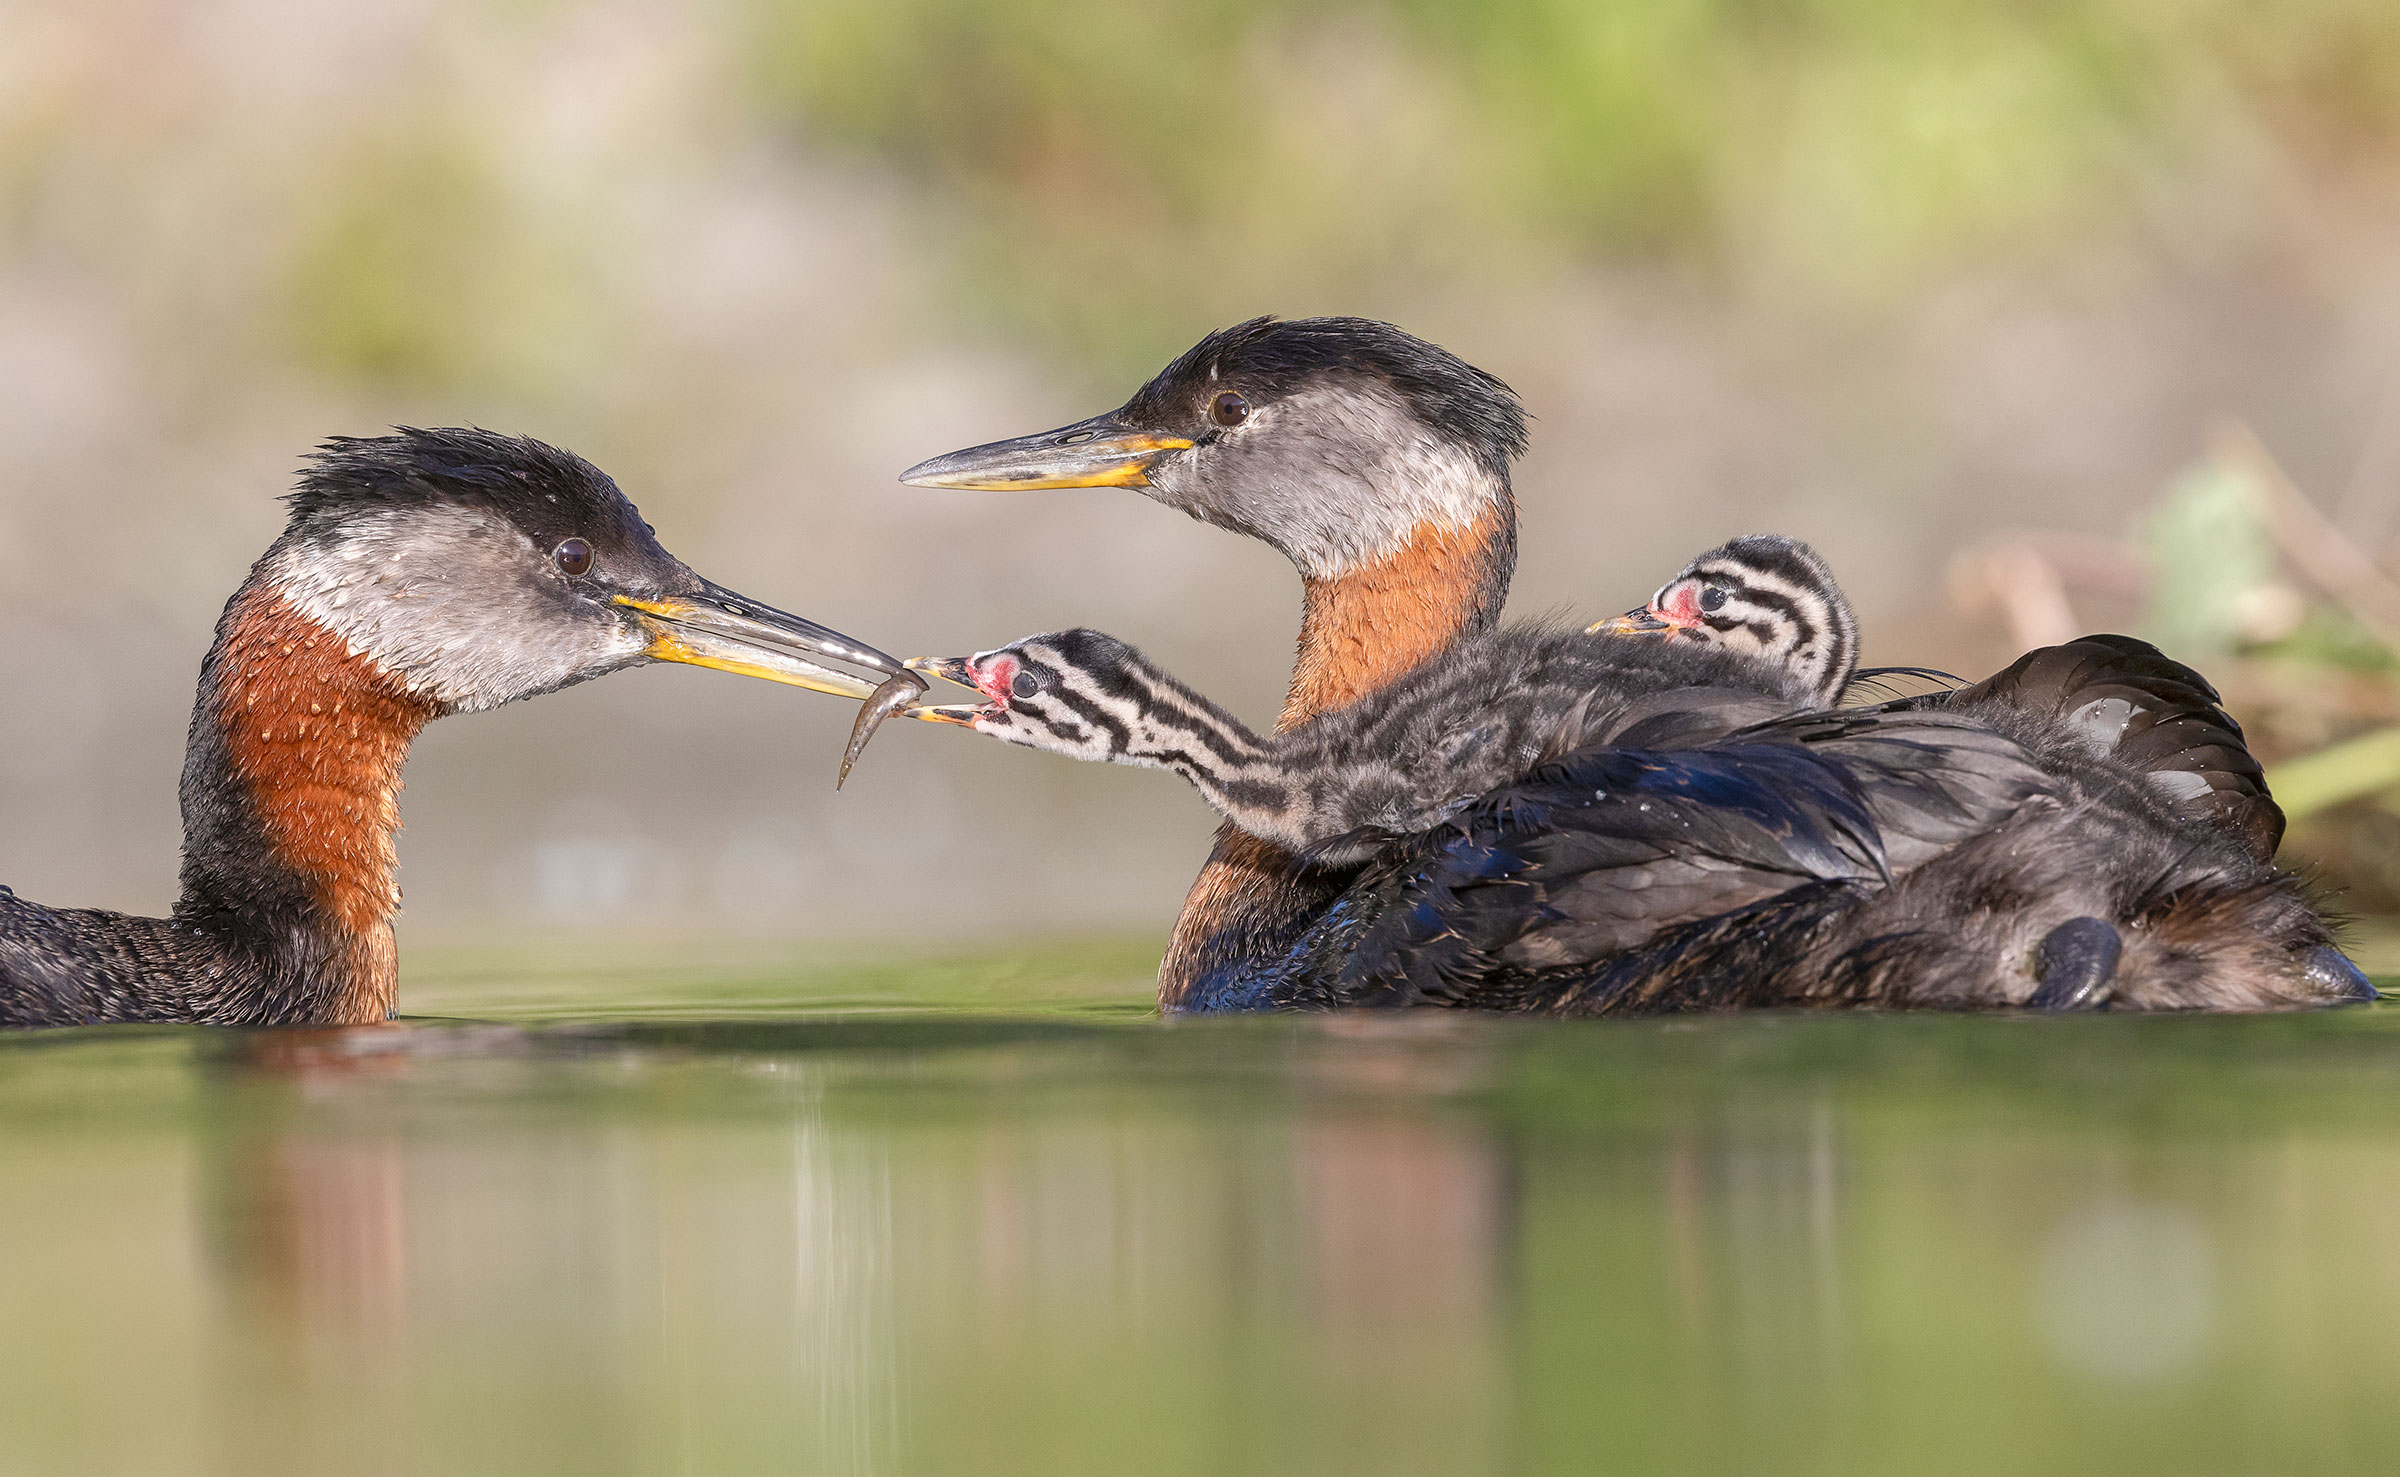 Two adult Red-necked Grebes face each other in the water. The entire grebe’s body on the right is visible, and two black and white-headed chicks sit on its back. One is leaning to receive a small fish from the bill of the parent.